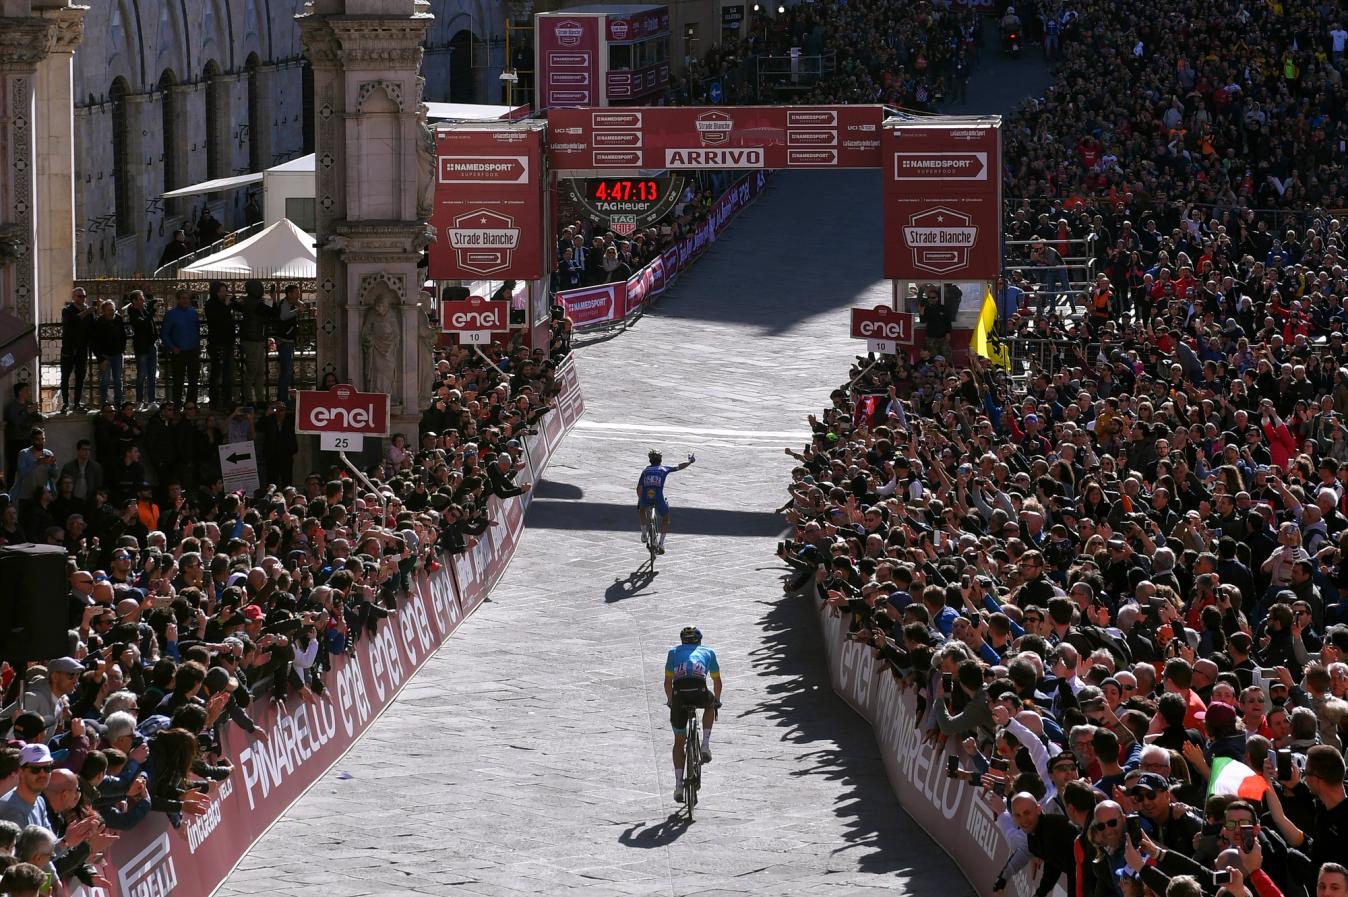 Julian Alaphilippe from winning Strade Bianche in 2019